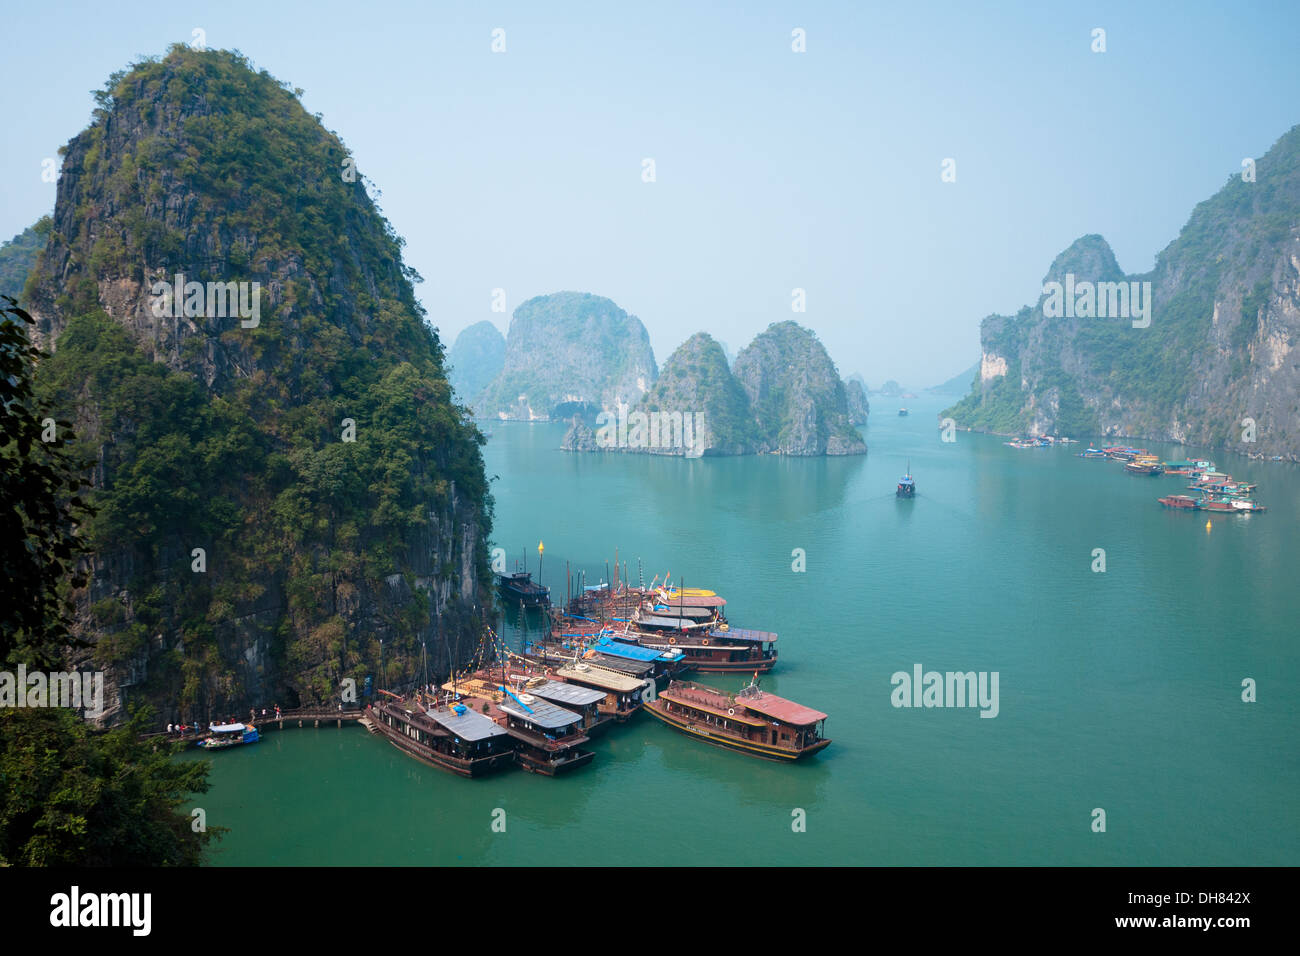 A view of the spectacular limestone karst formations rising above boats moored  in Halong Bay, Vietnam. Stock Photo